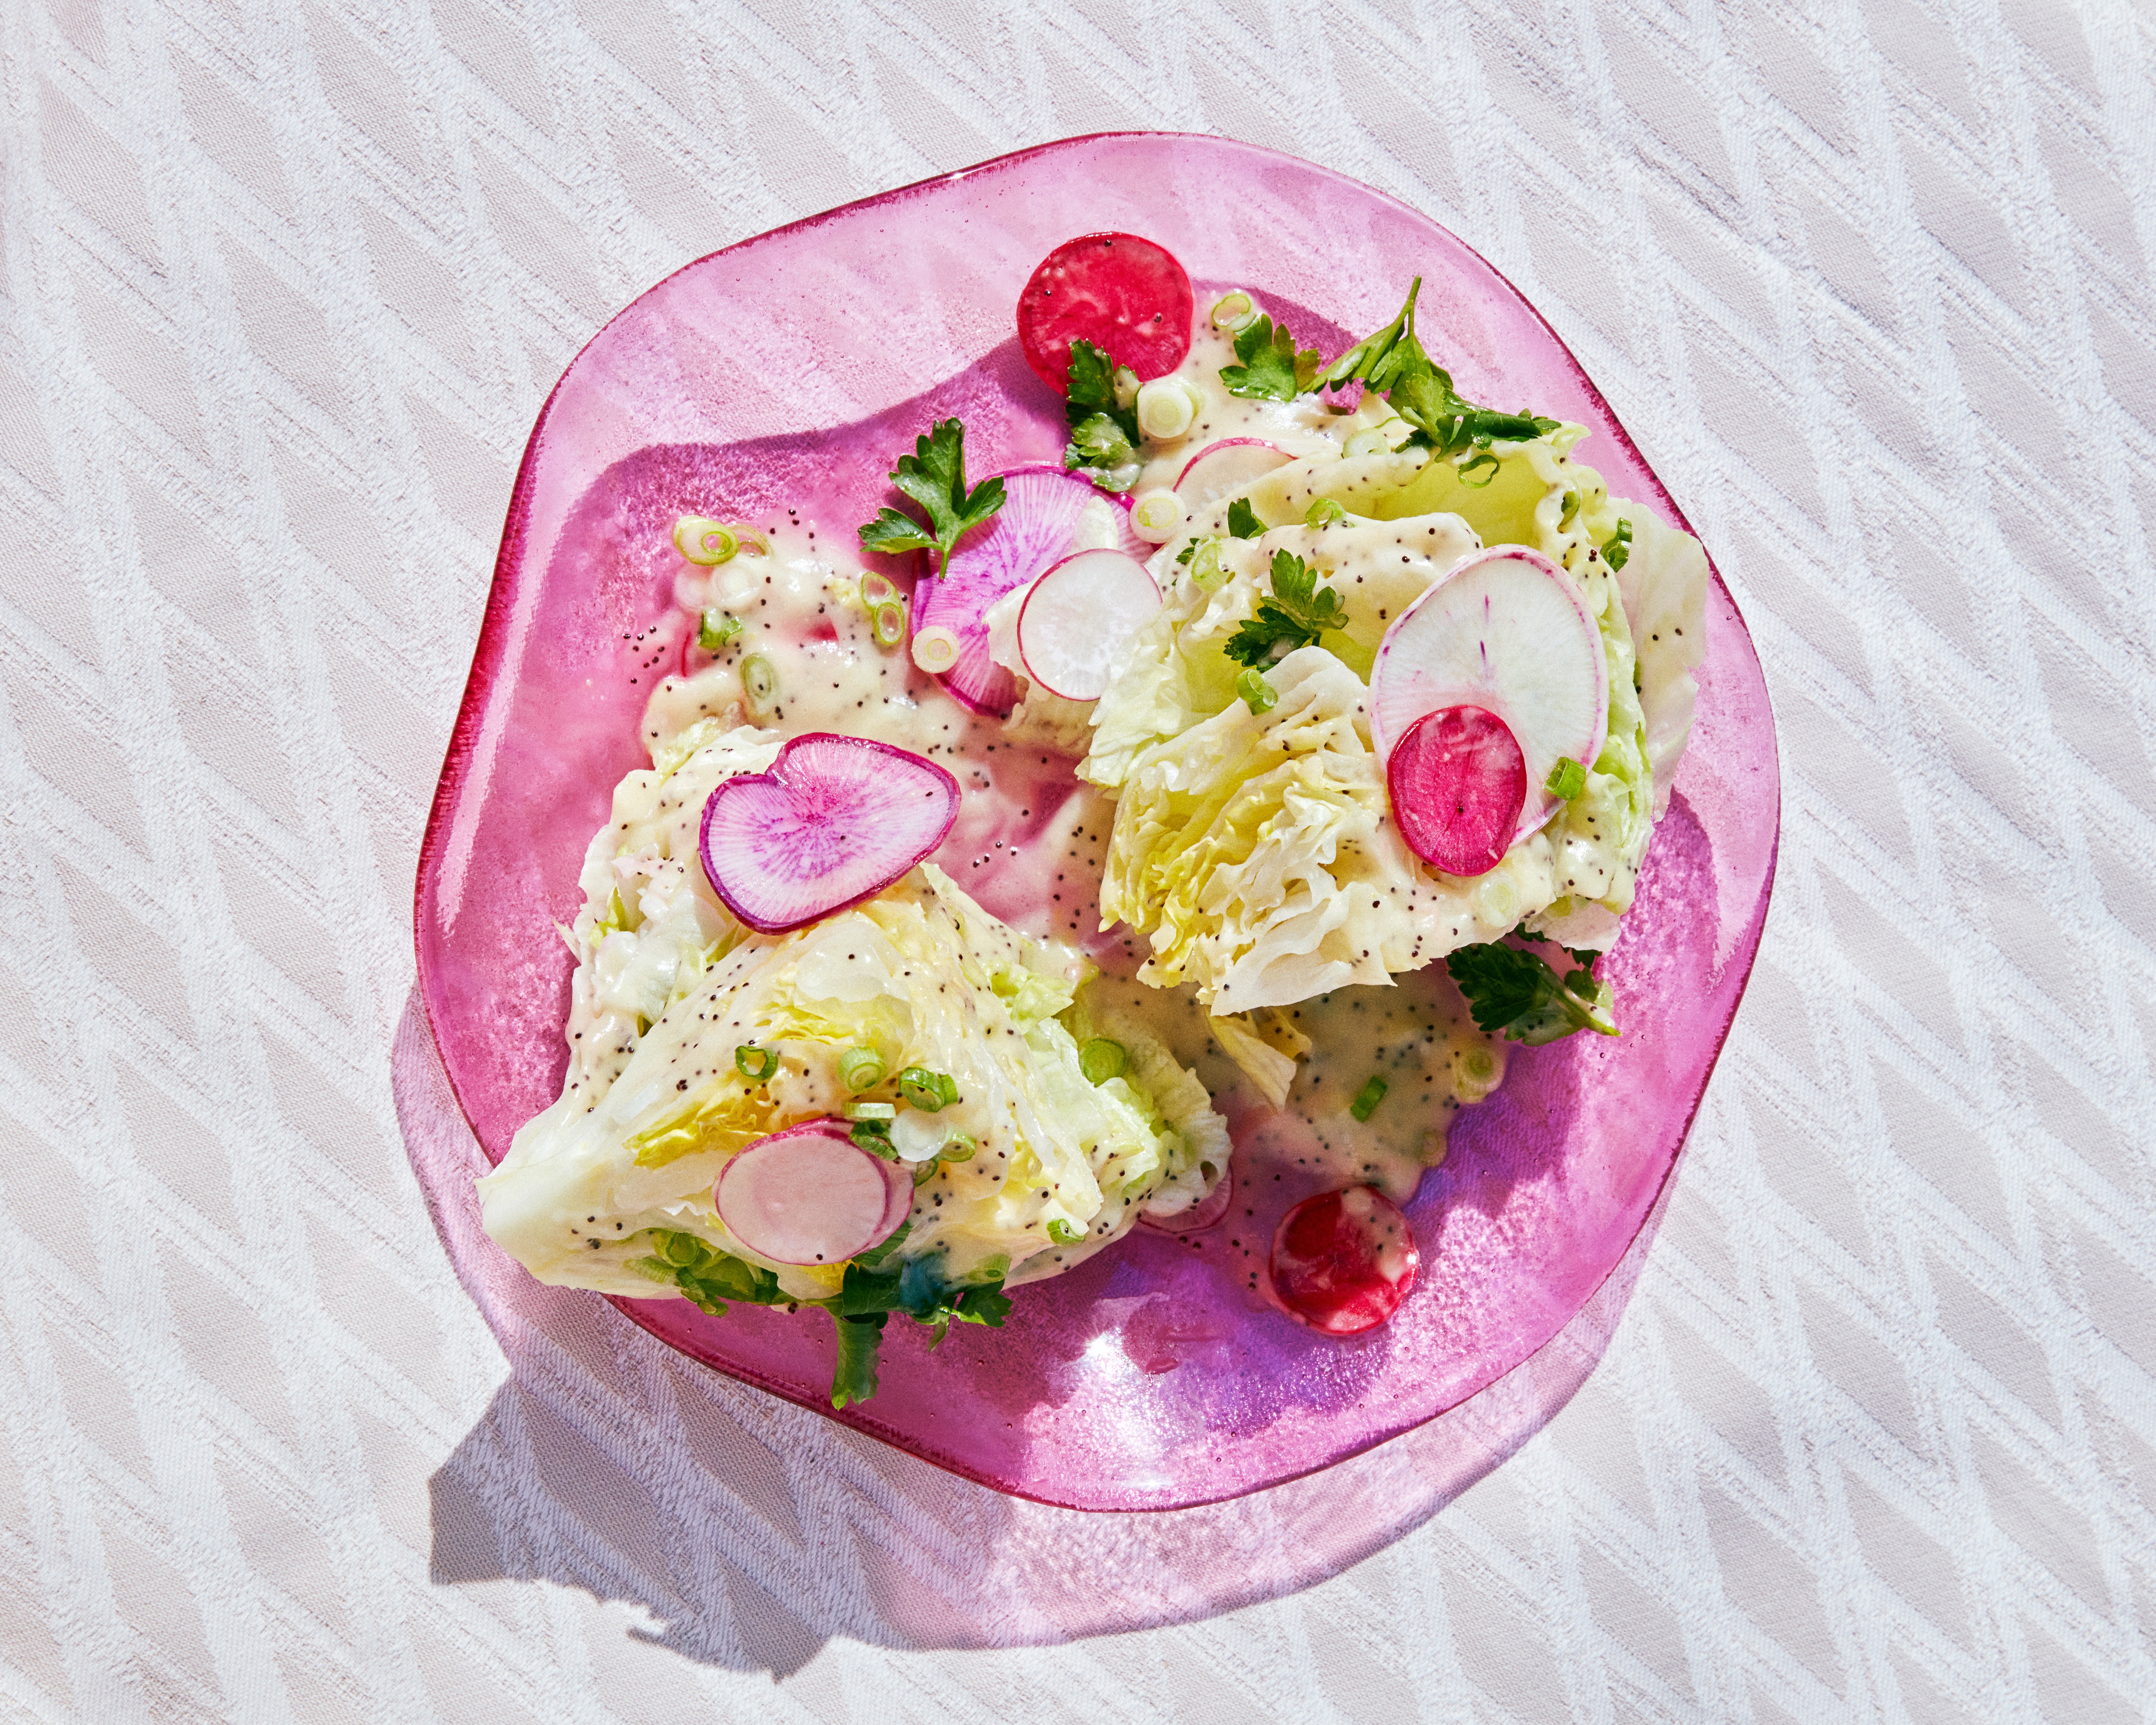 A wedge salad with iceberg lettuce, miso-poppy dressing, and radishes, served on a pink plate.